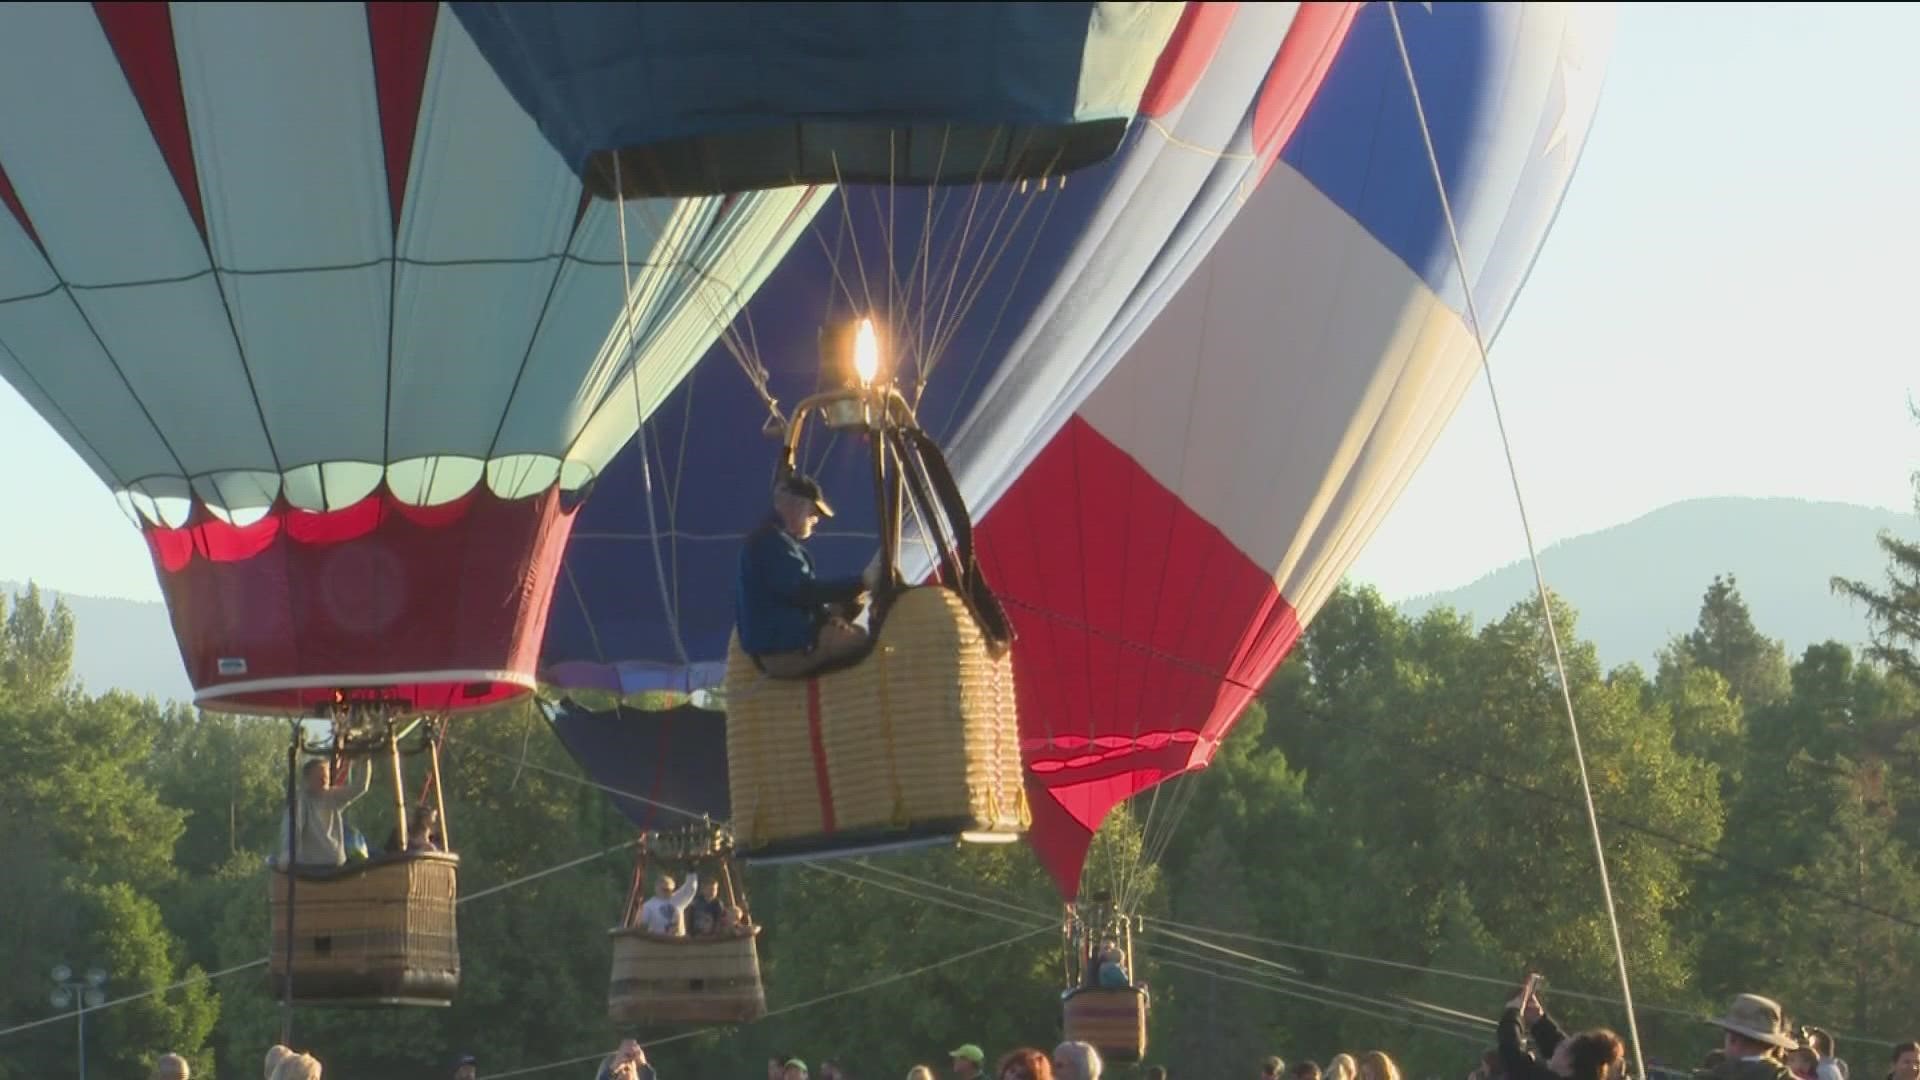 Interview with pilot Zack Clark. The 31st annual Spirit of Boise Balloon Classic continues through Sunday morning.